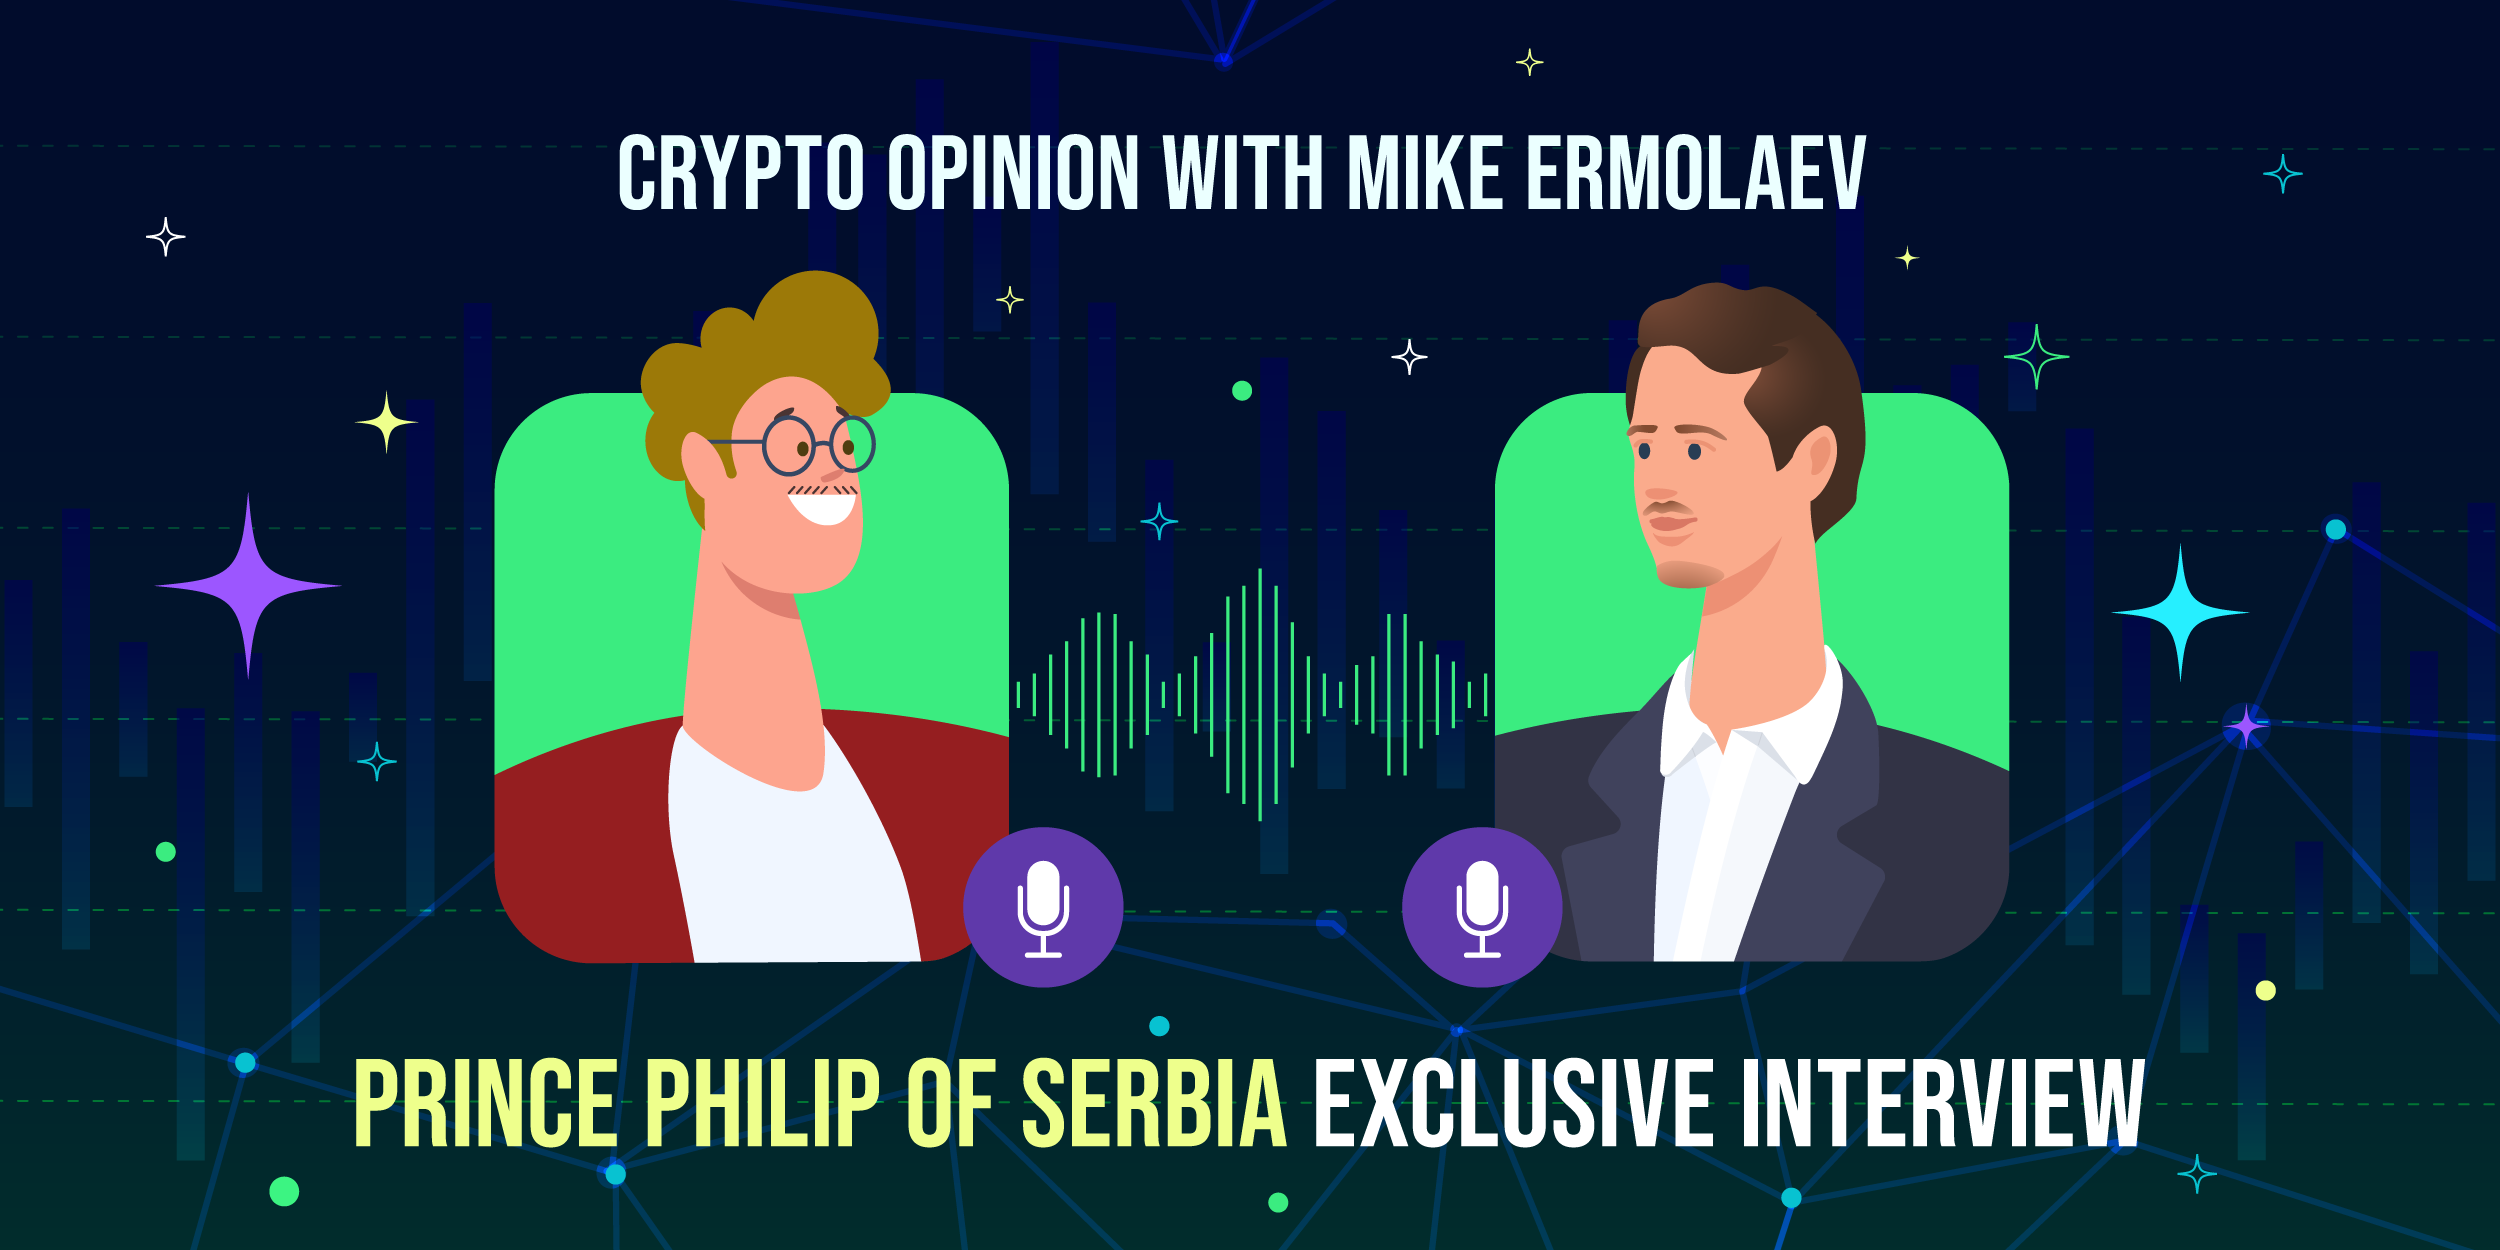 Crypto Opinion with Mike Ermolaev. Prince Philip of Serbia